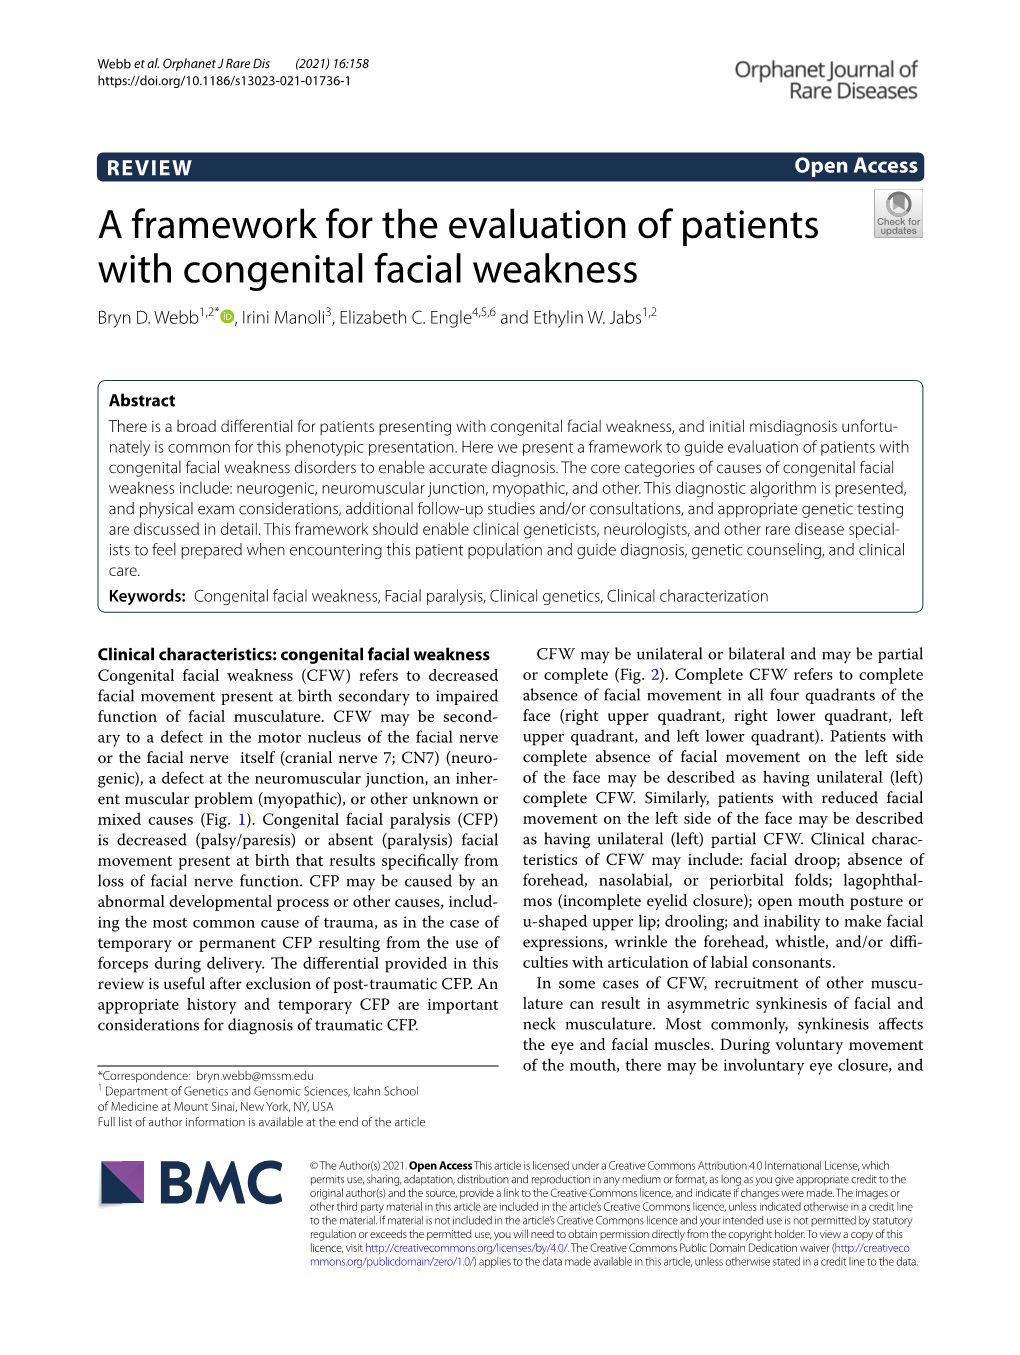 A Framework for the Evaluation of Patients with Congenital Facial Weakness Bryn D